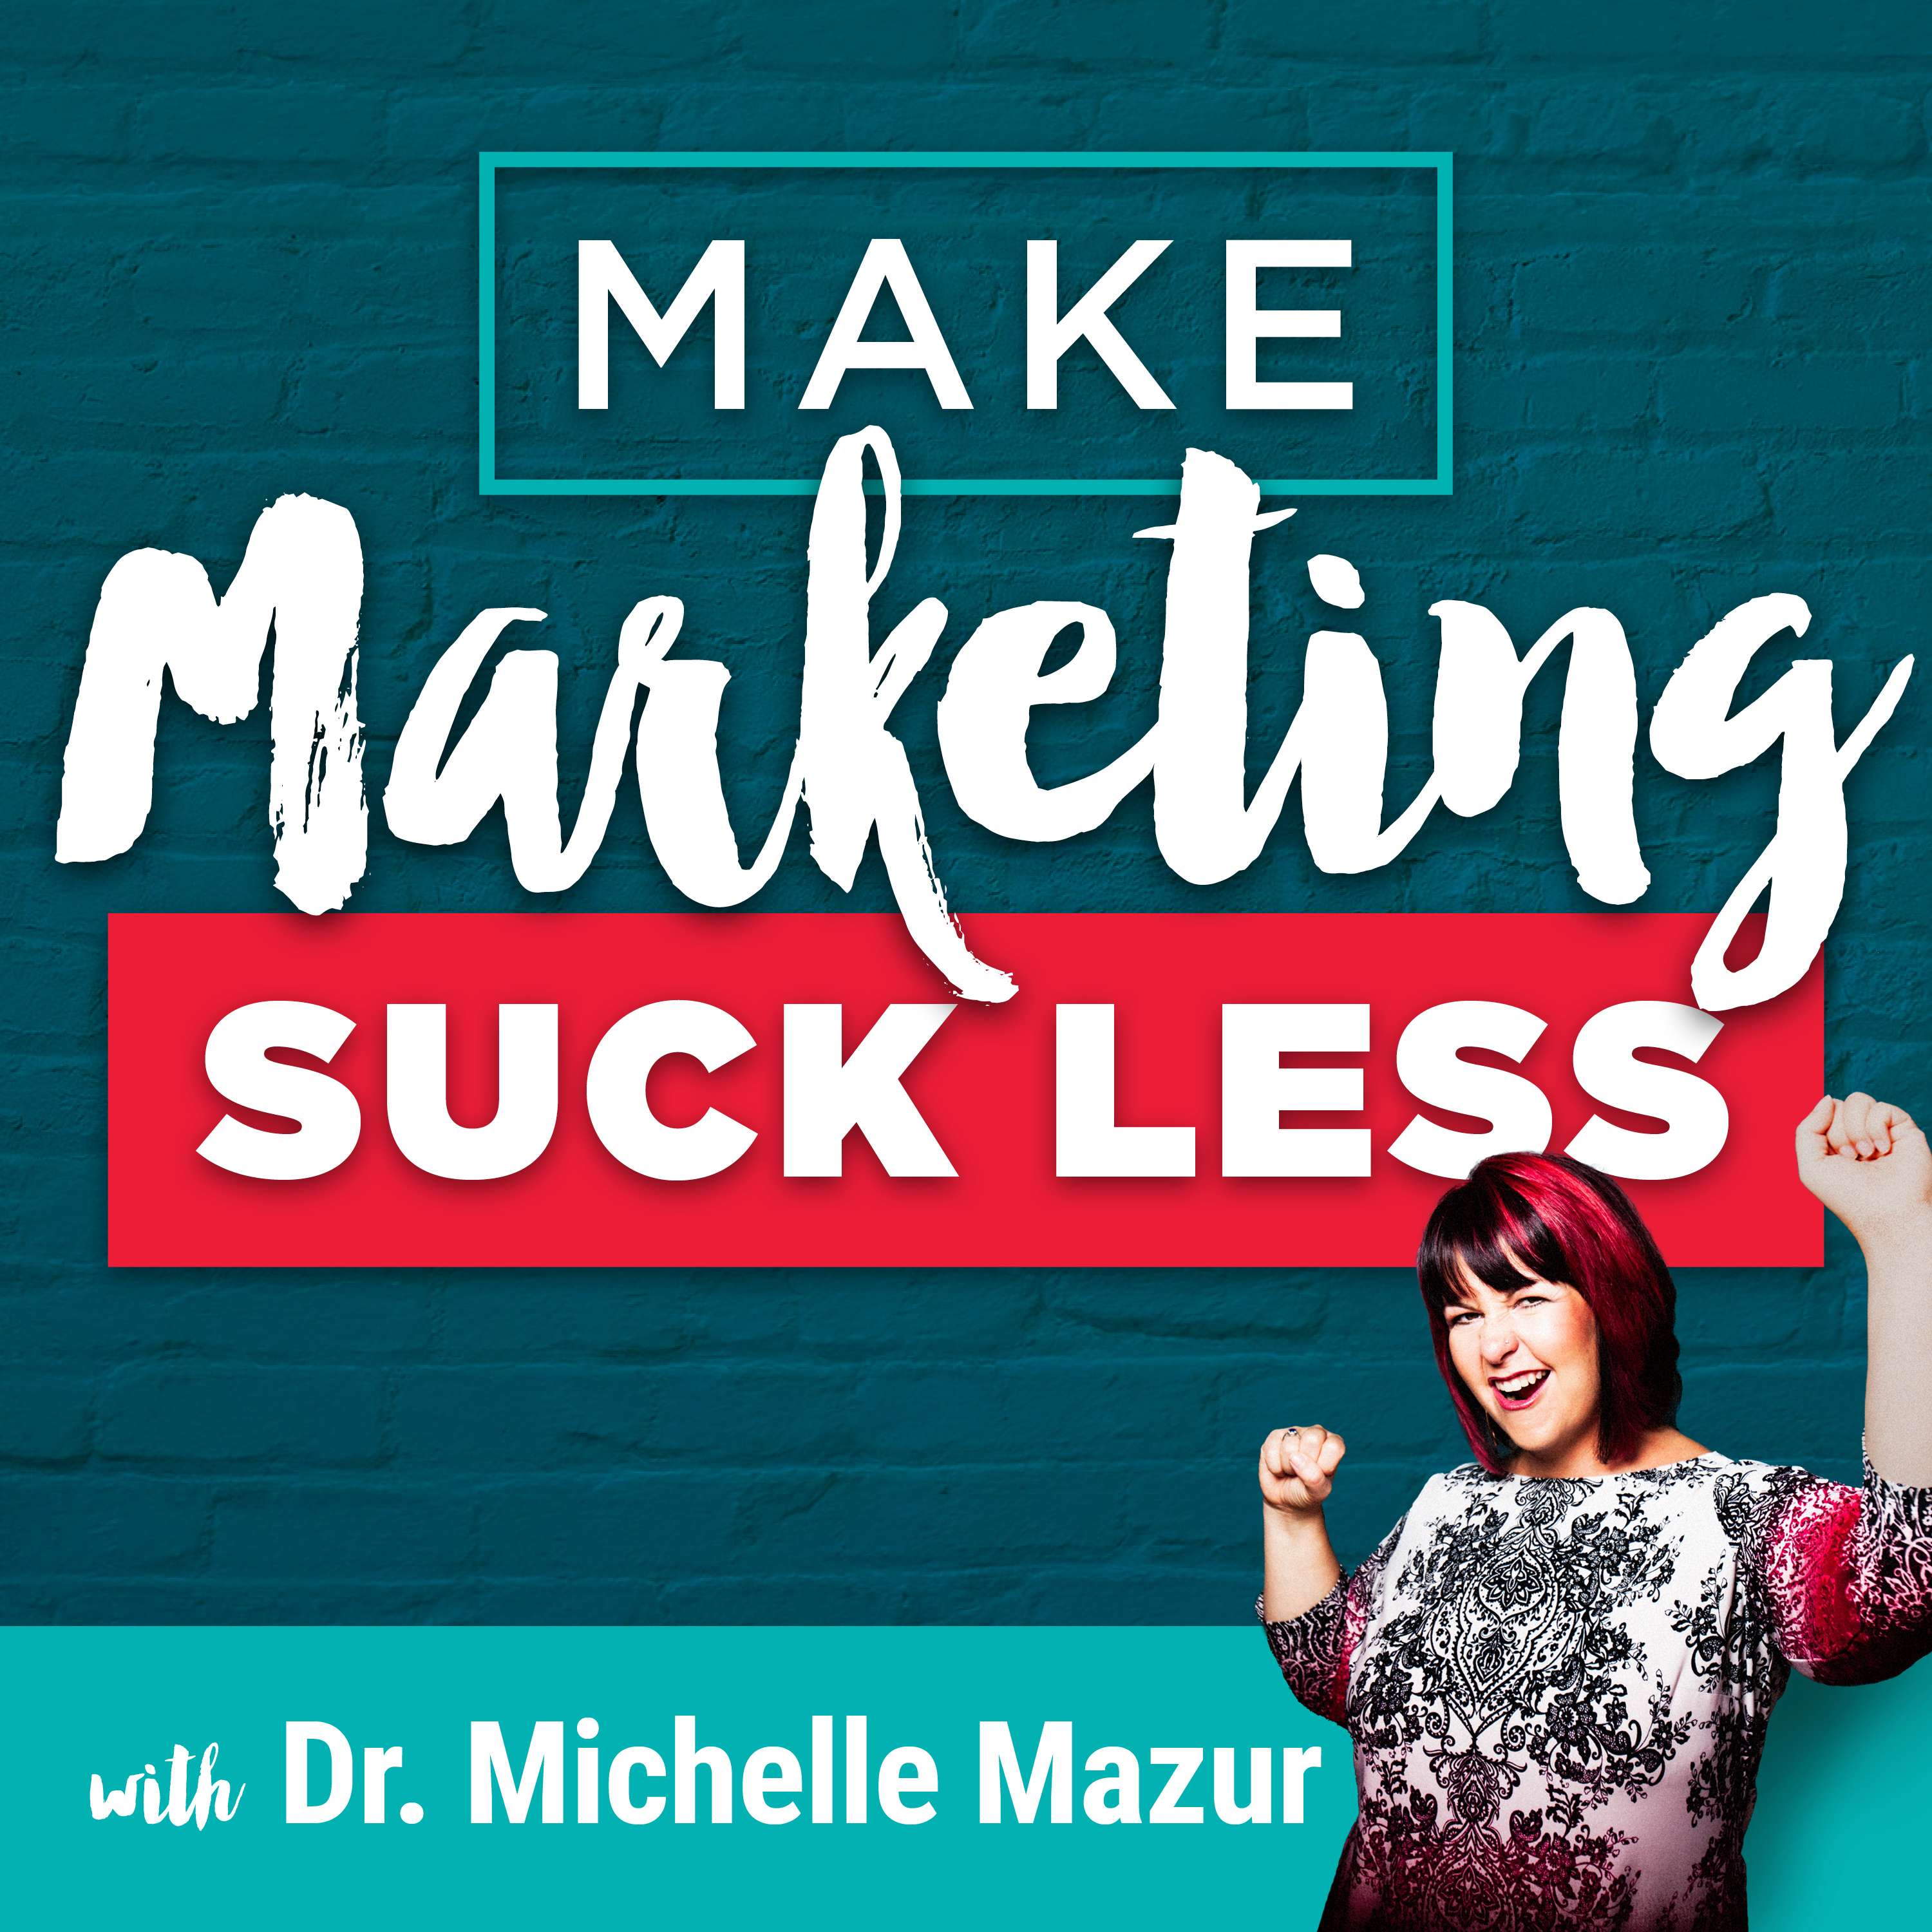 Trailer: Introducing the Make Marketing Suck Less Podcast